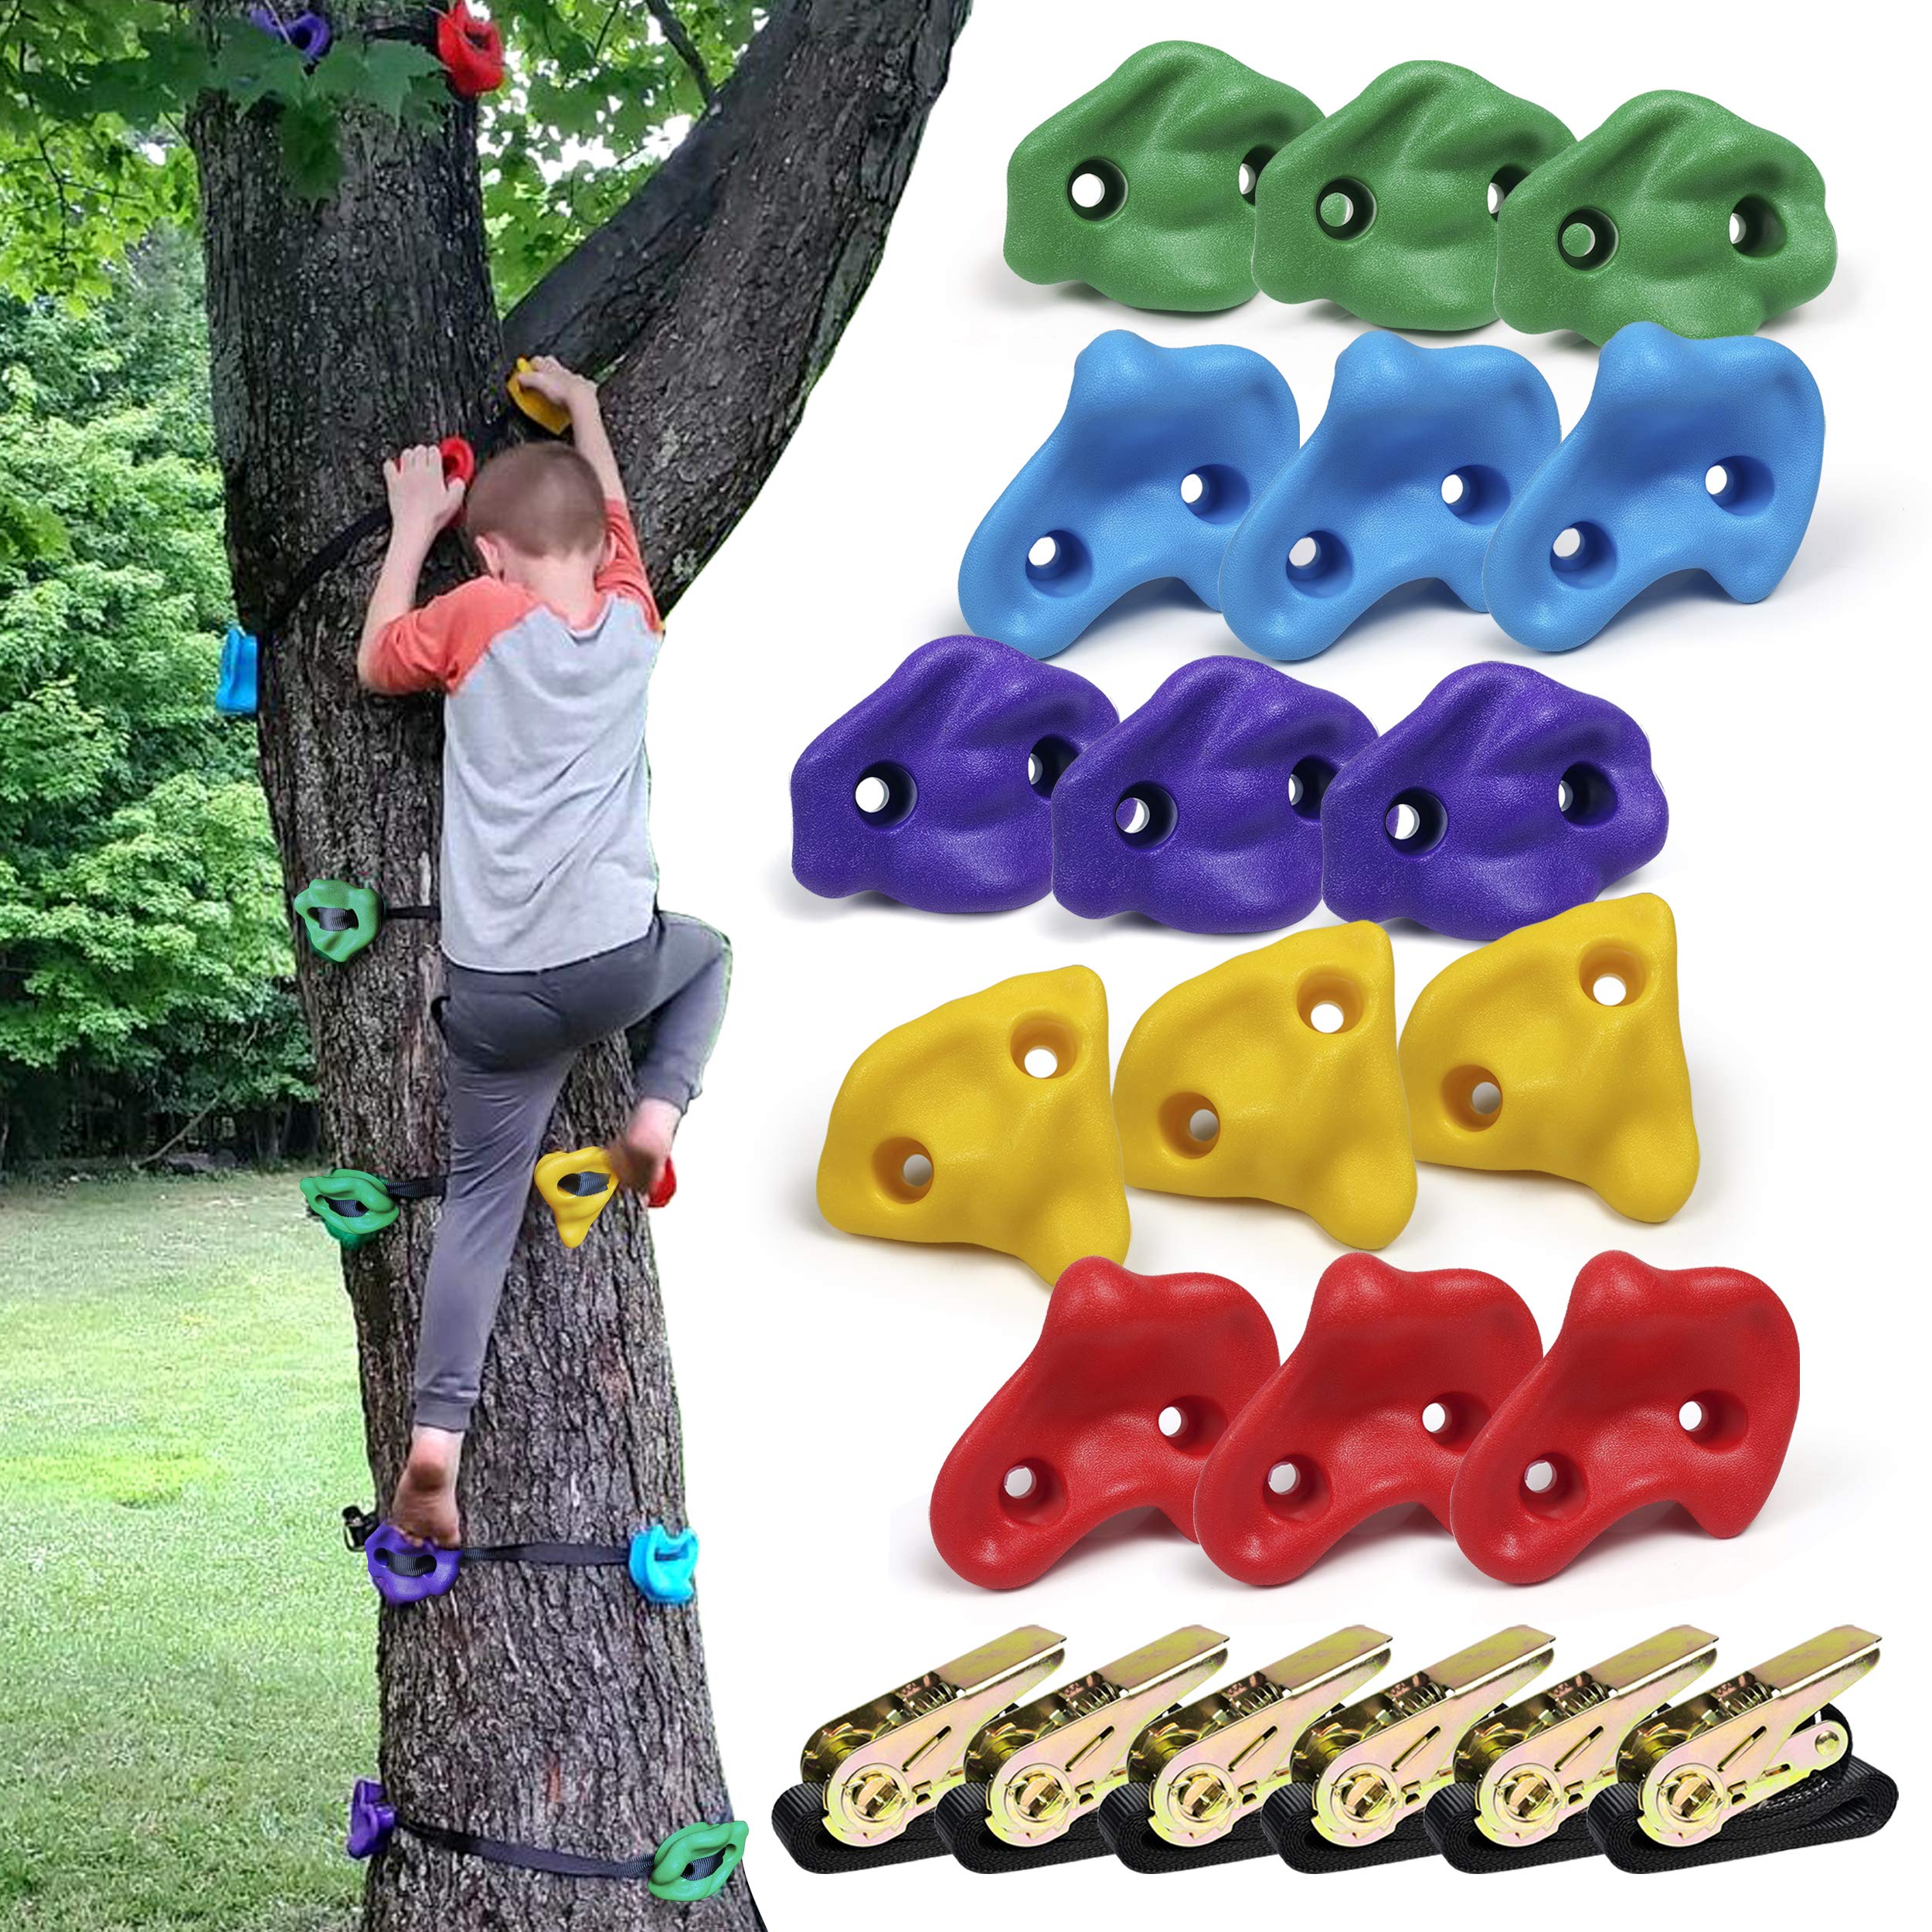 ssbright tree climbers, set of 15 climbing holds/steps for kids' outdoor active play with 6 ratchet straps